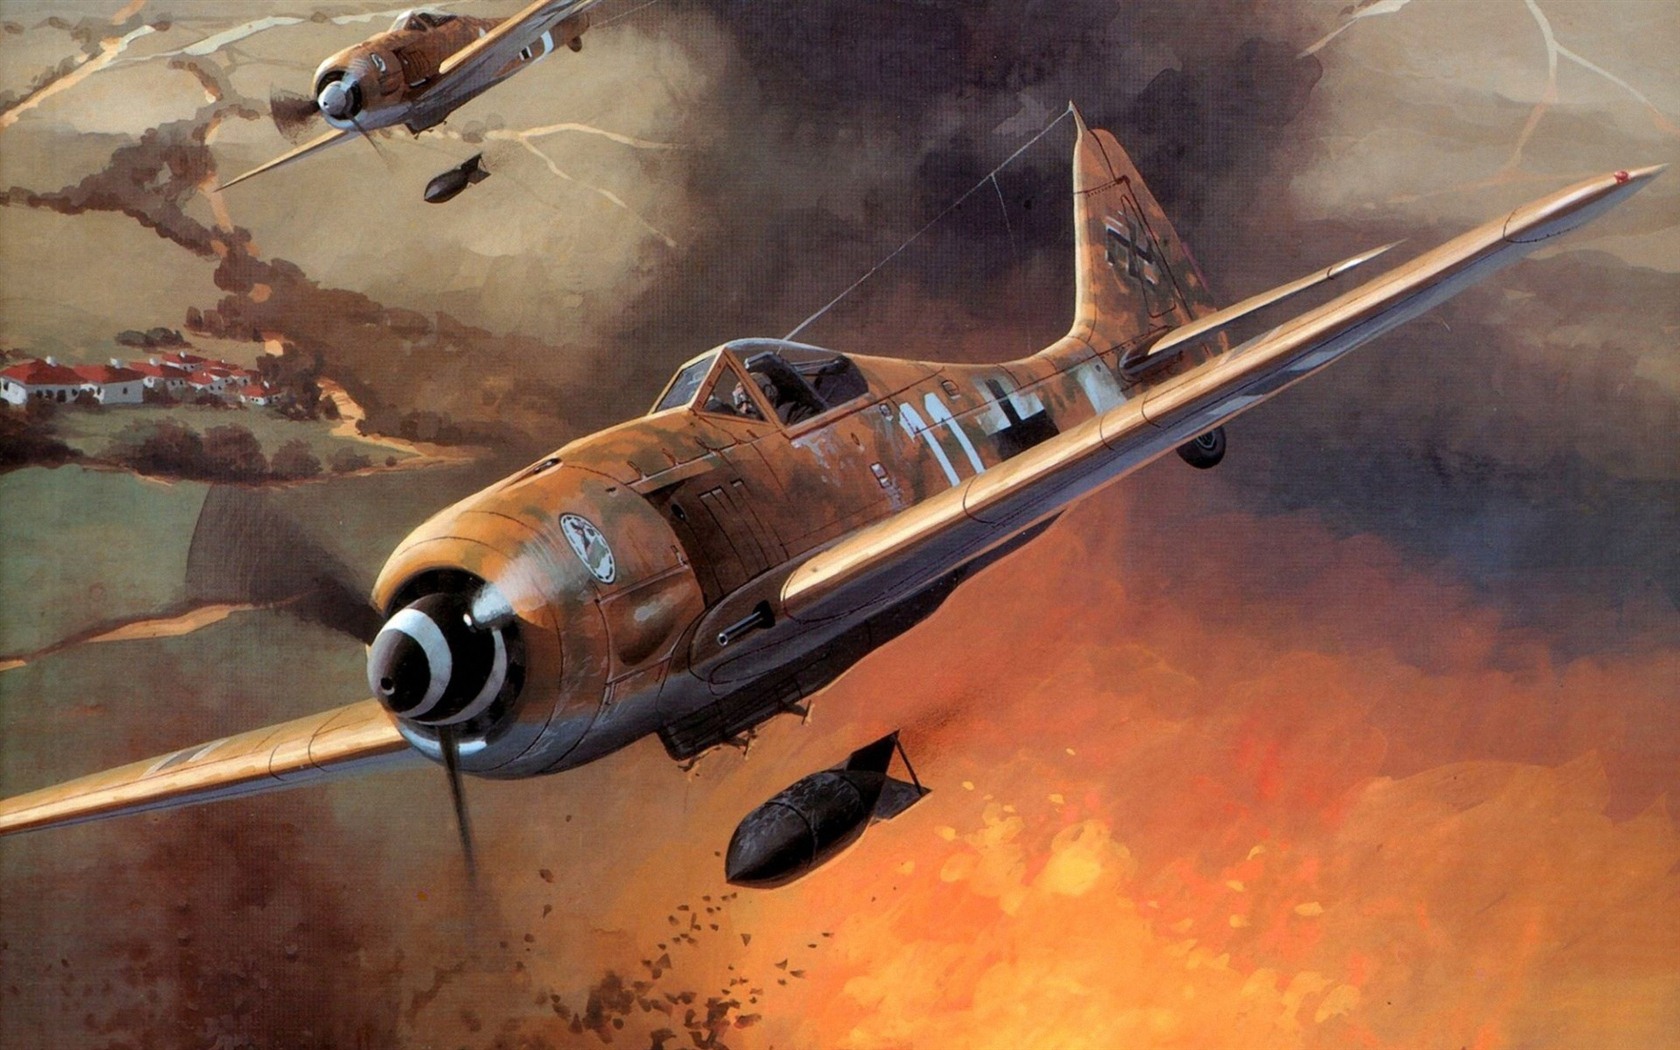 Military aircraft flight exquisite painting wallpapers #6 - 1680x1050